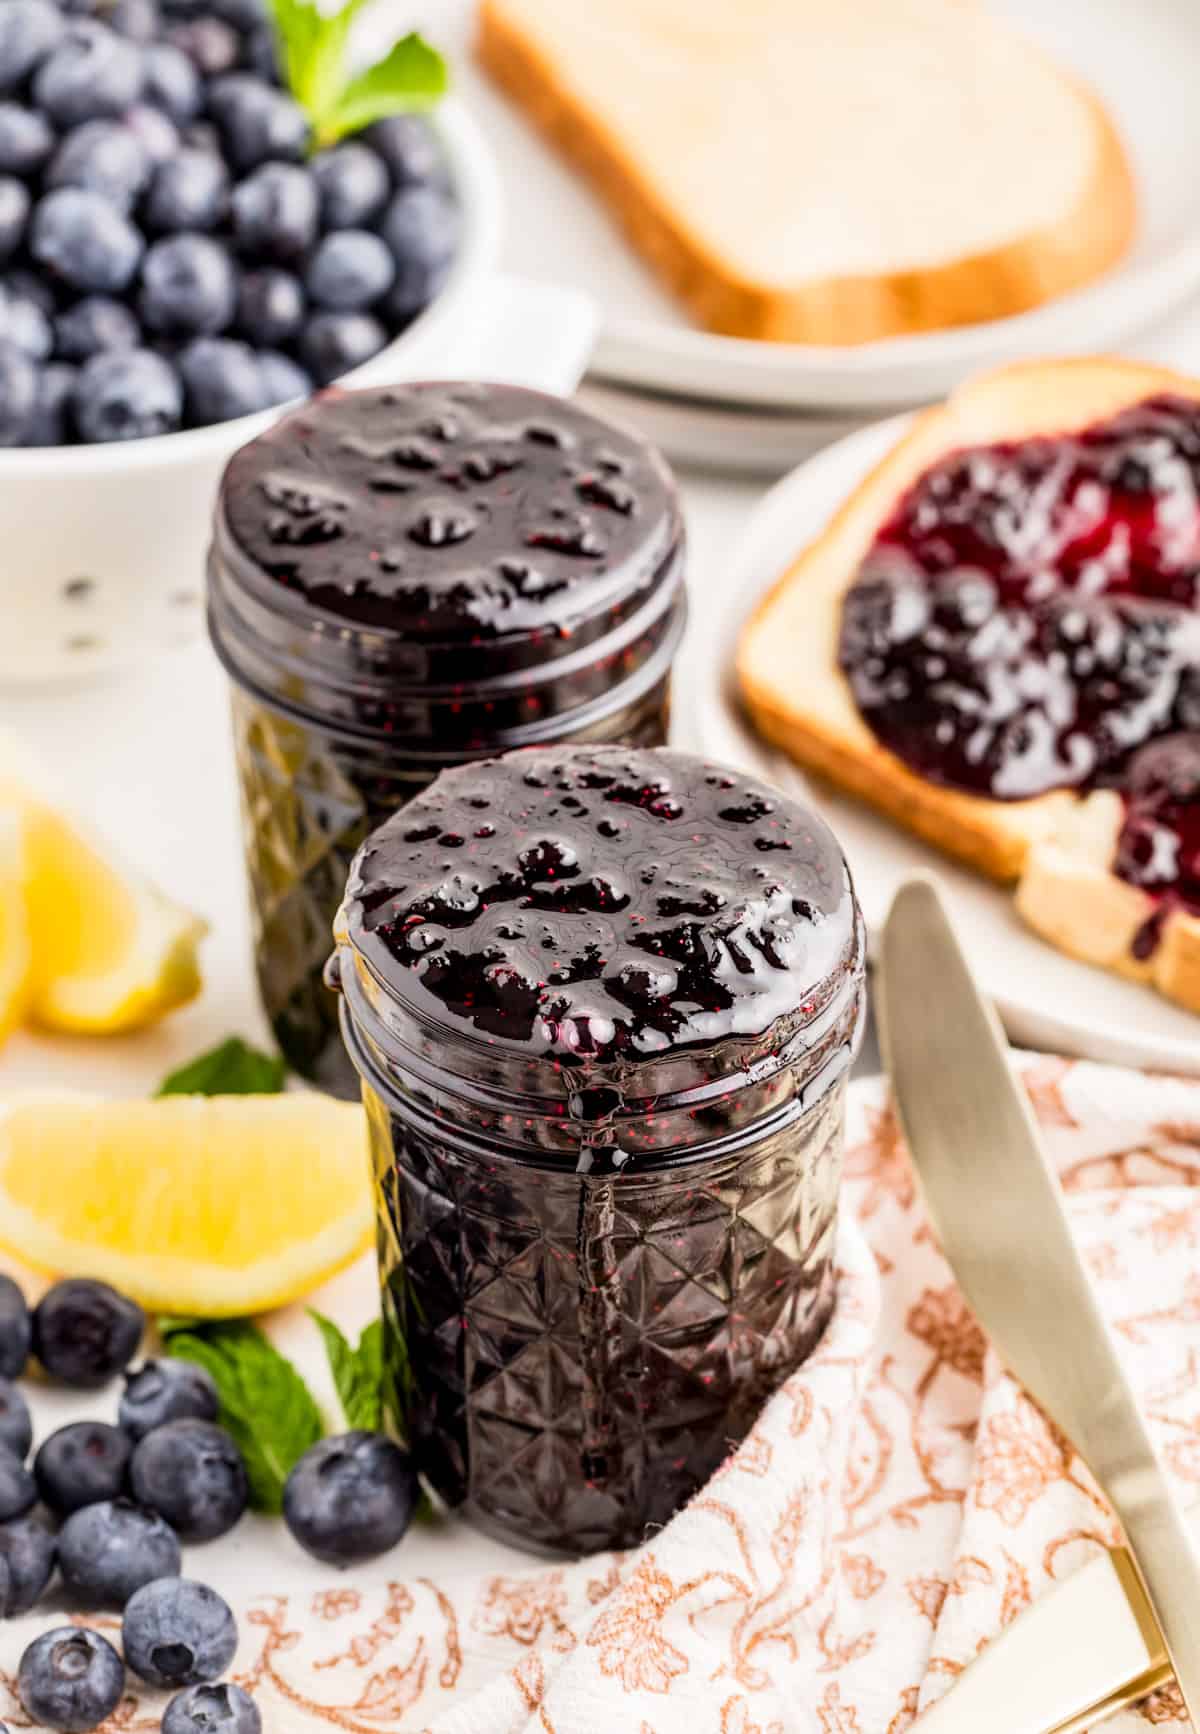 Two jars of jam with blueberries in background and jam spread on toast on the side of jars.